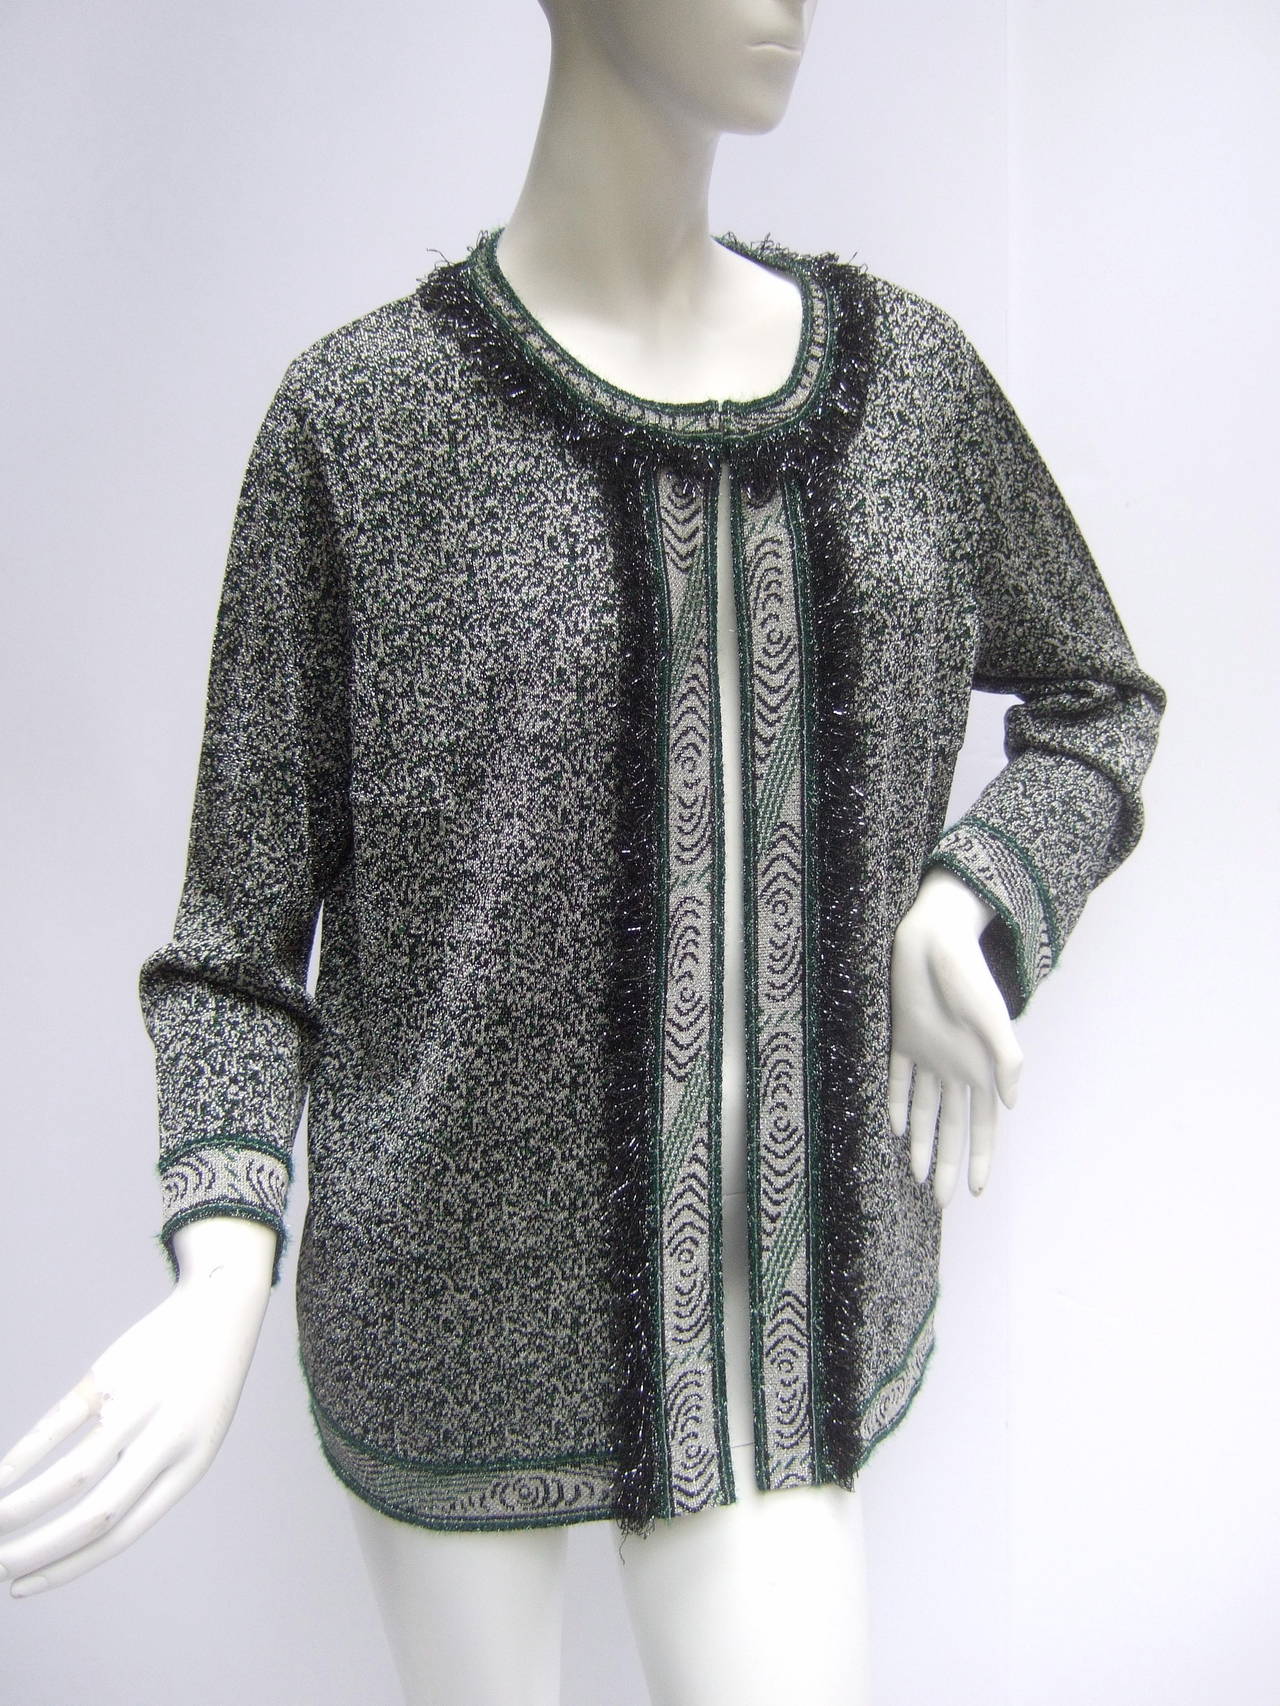 Missoni Italy silver metallic knit cardigan US Size 12
The stylish Italian knit cardigan is designed with silver metallic, gray, black & green colors. The collar, cuffs, front opening & hemline are accented with a metallic fringe border

The